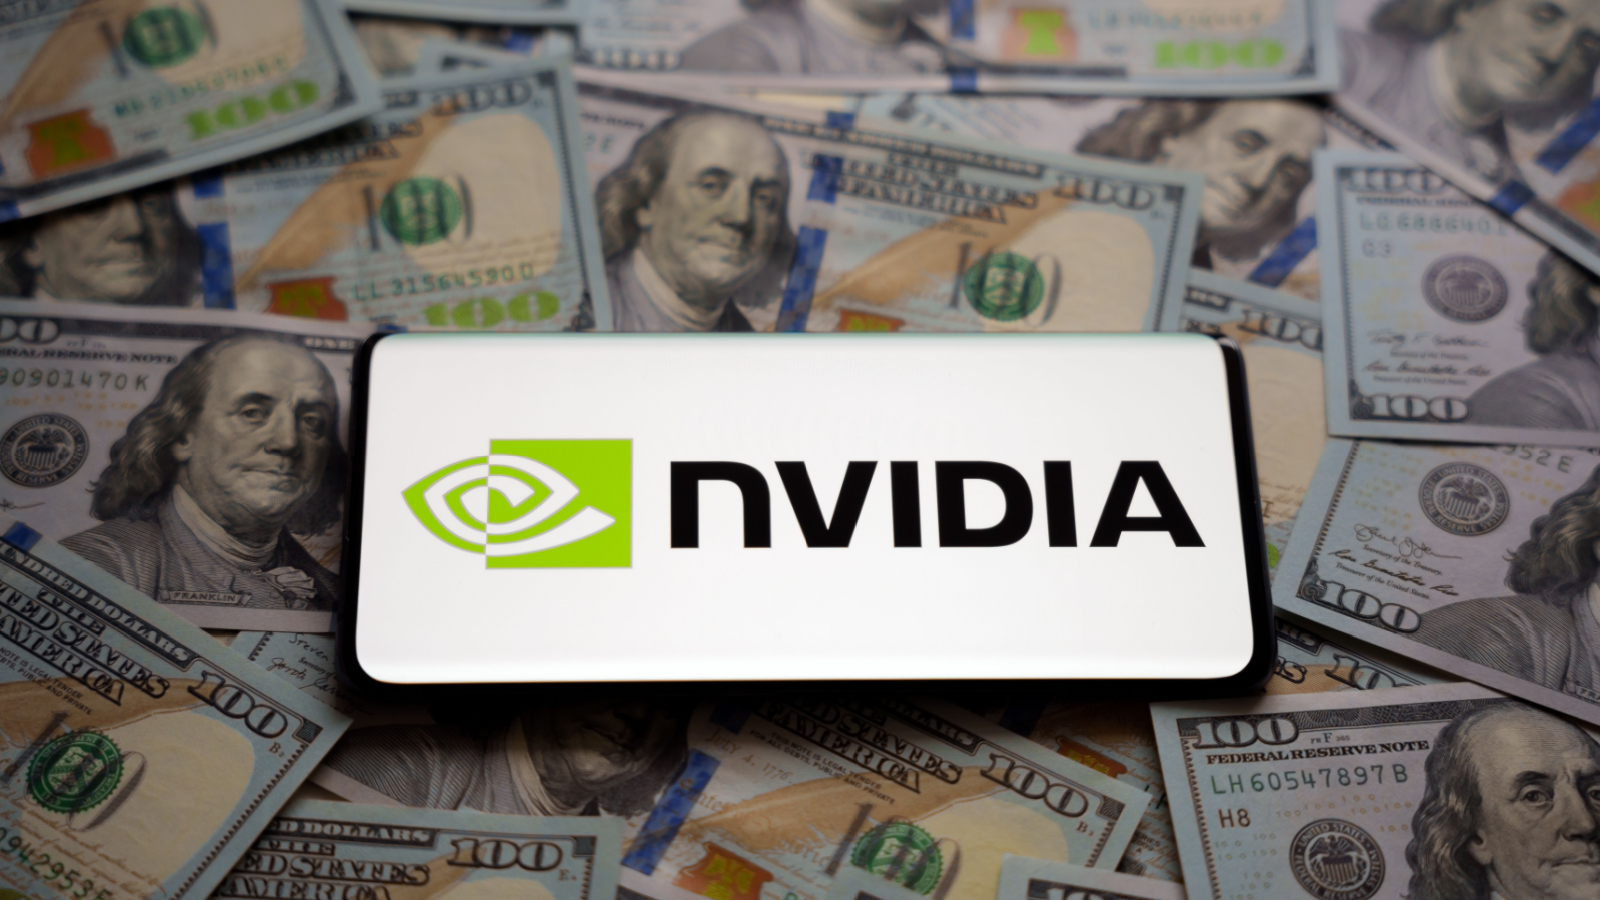 Nvidia Has Huge Opportunities but Is Facing Major Threats InvestorPlace